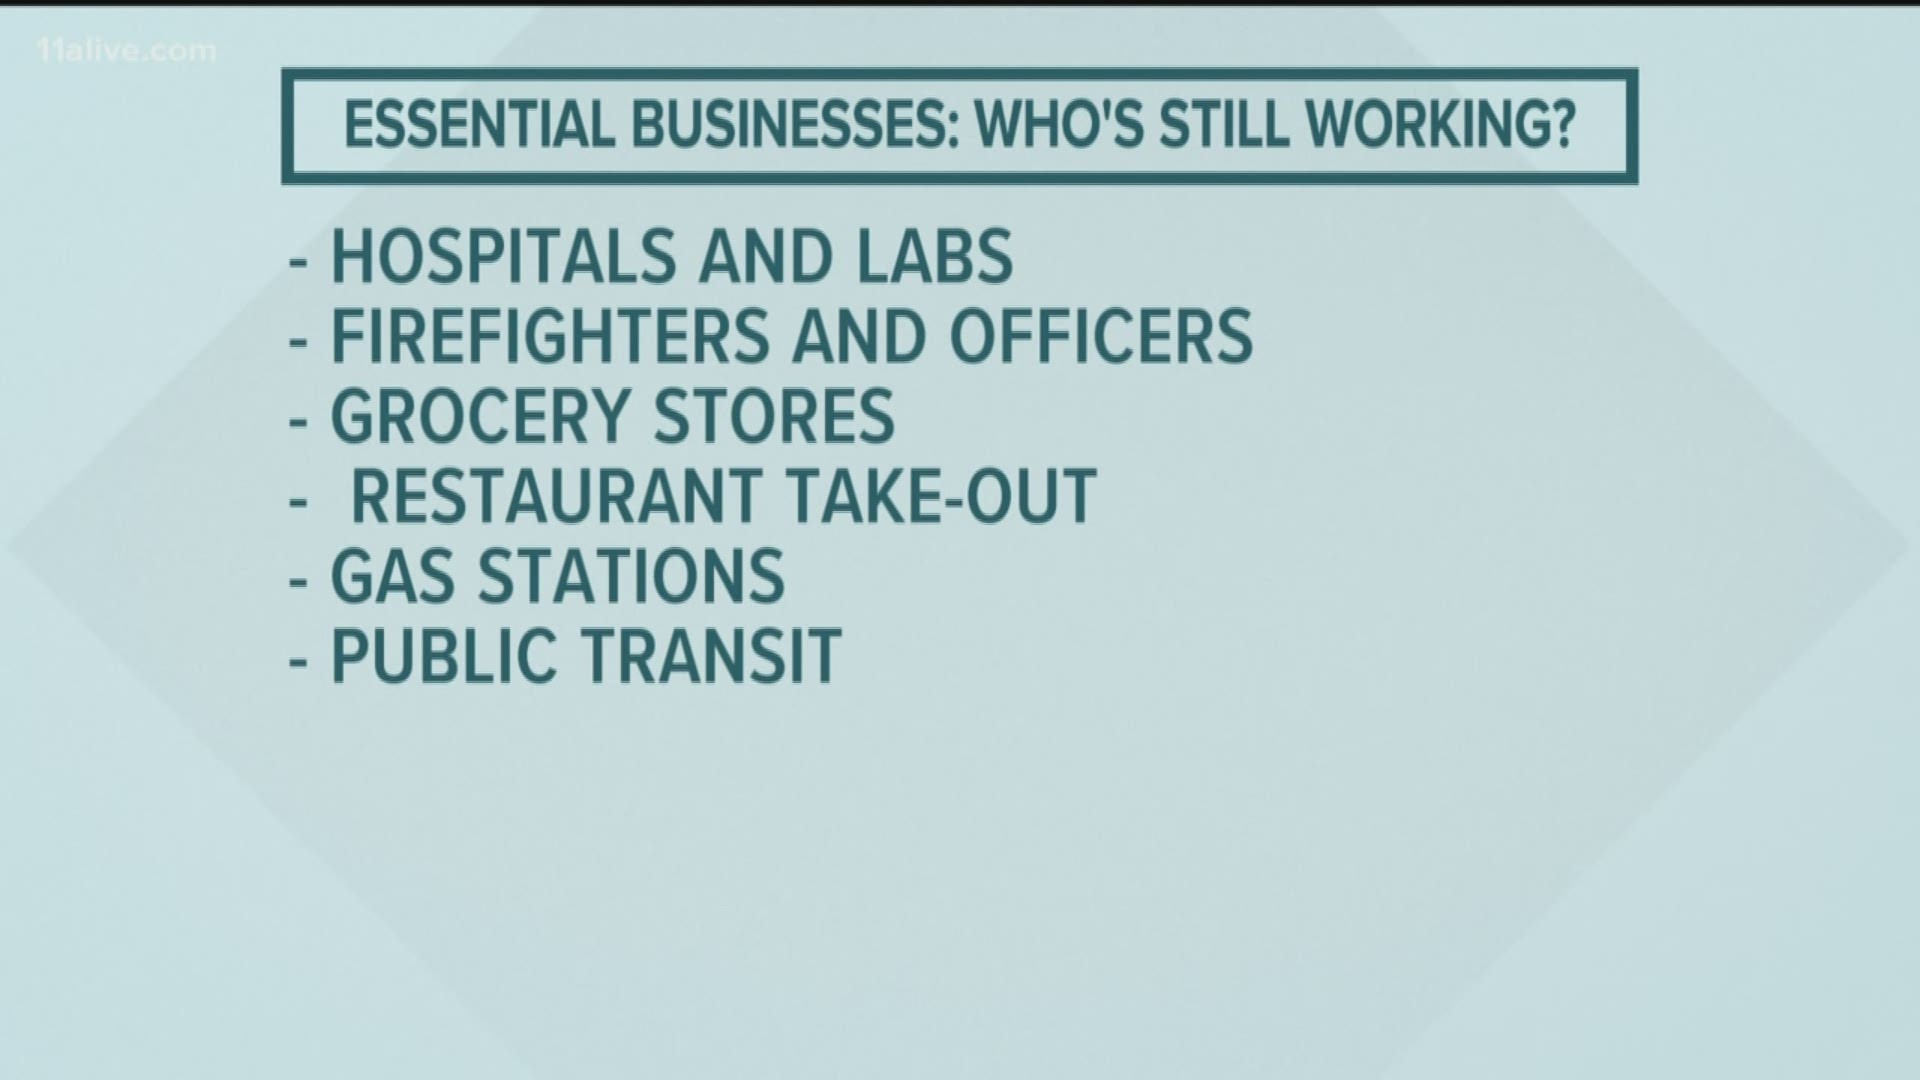 Here's what some are doing to keep their workers and customers safe.